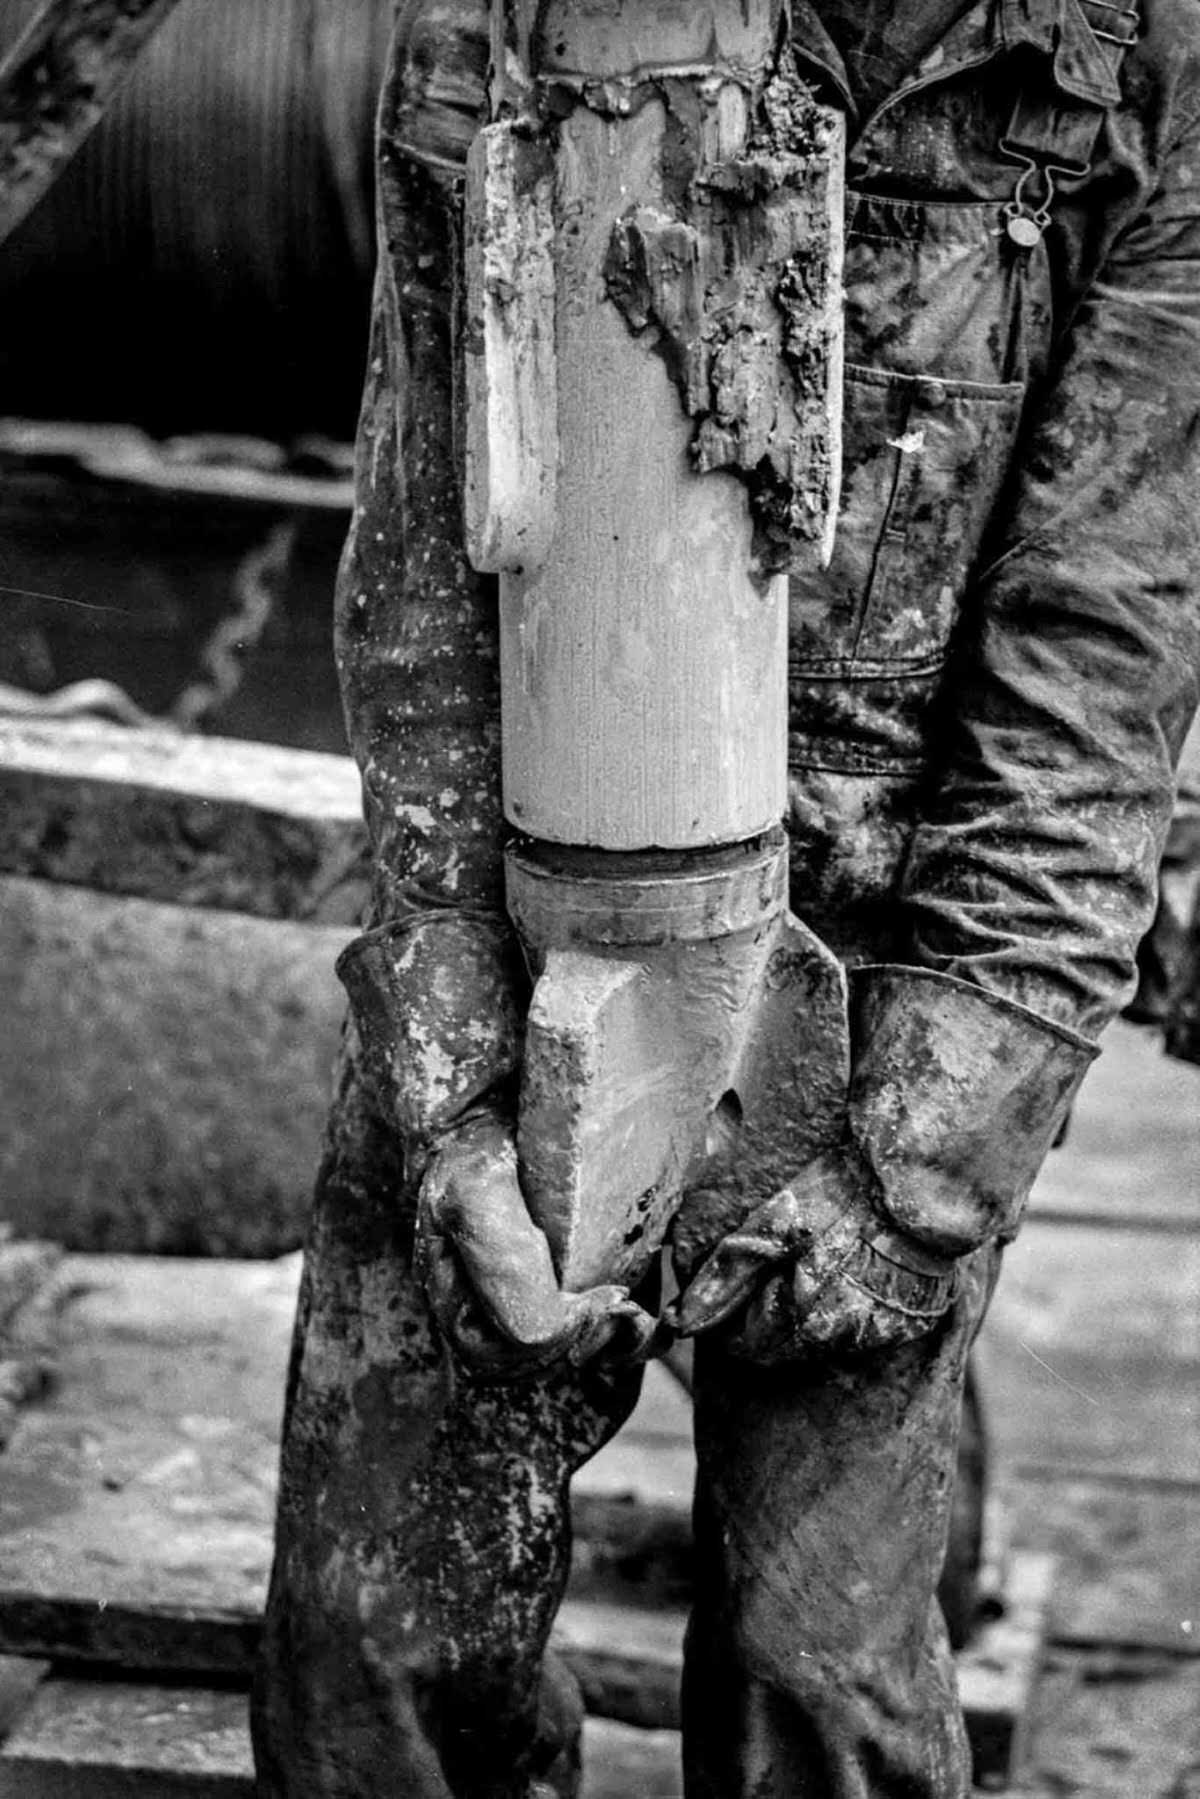 A roughneck holds a mud-caked drill bit.